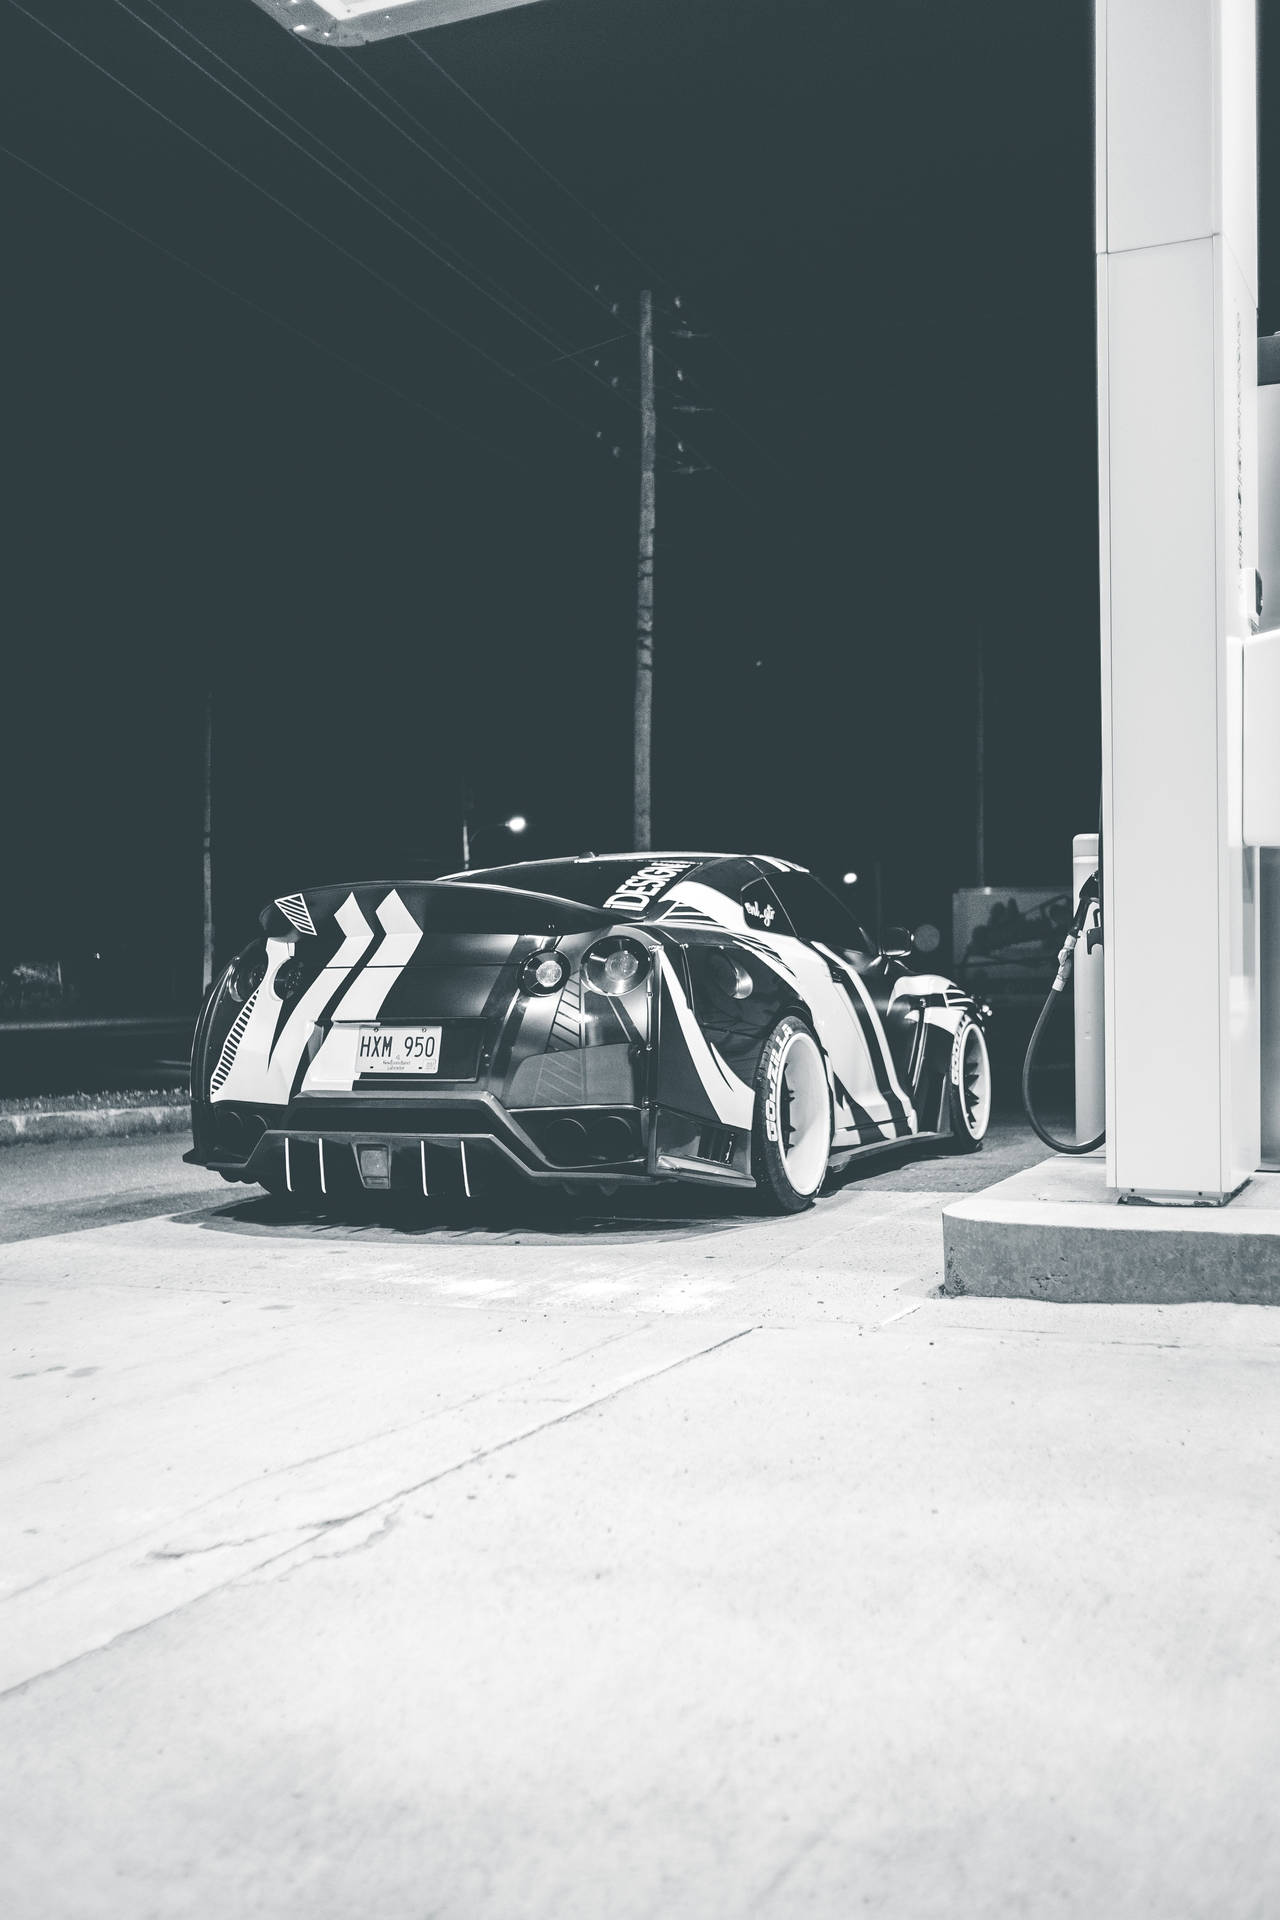 Grayscale Gas Station Wallpaper